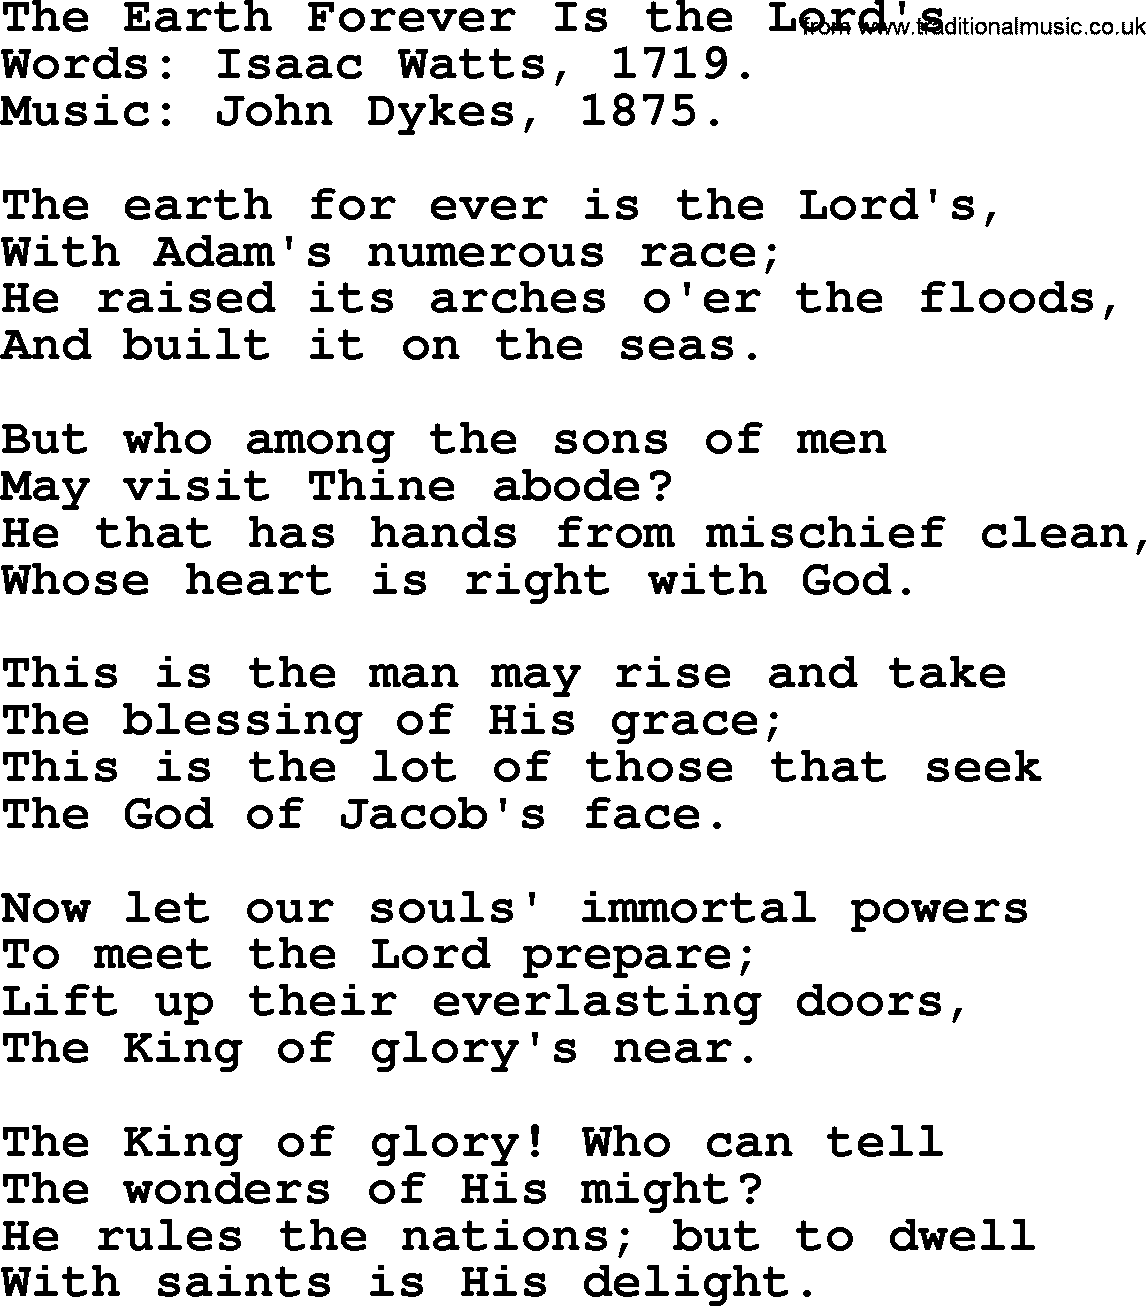 Isaac Watts Christian hymn: The Earth Forever Is the Lord's- lyricss